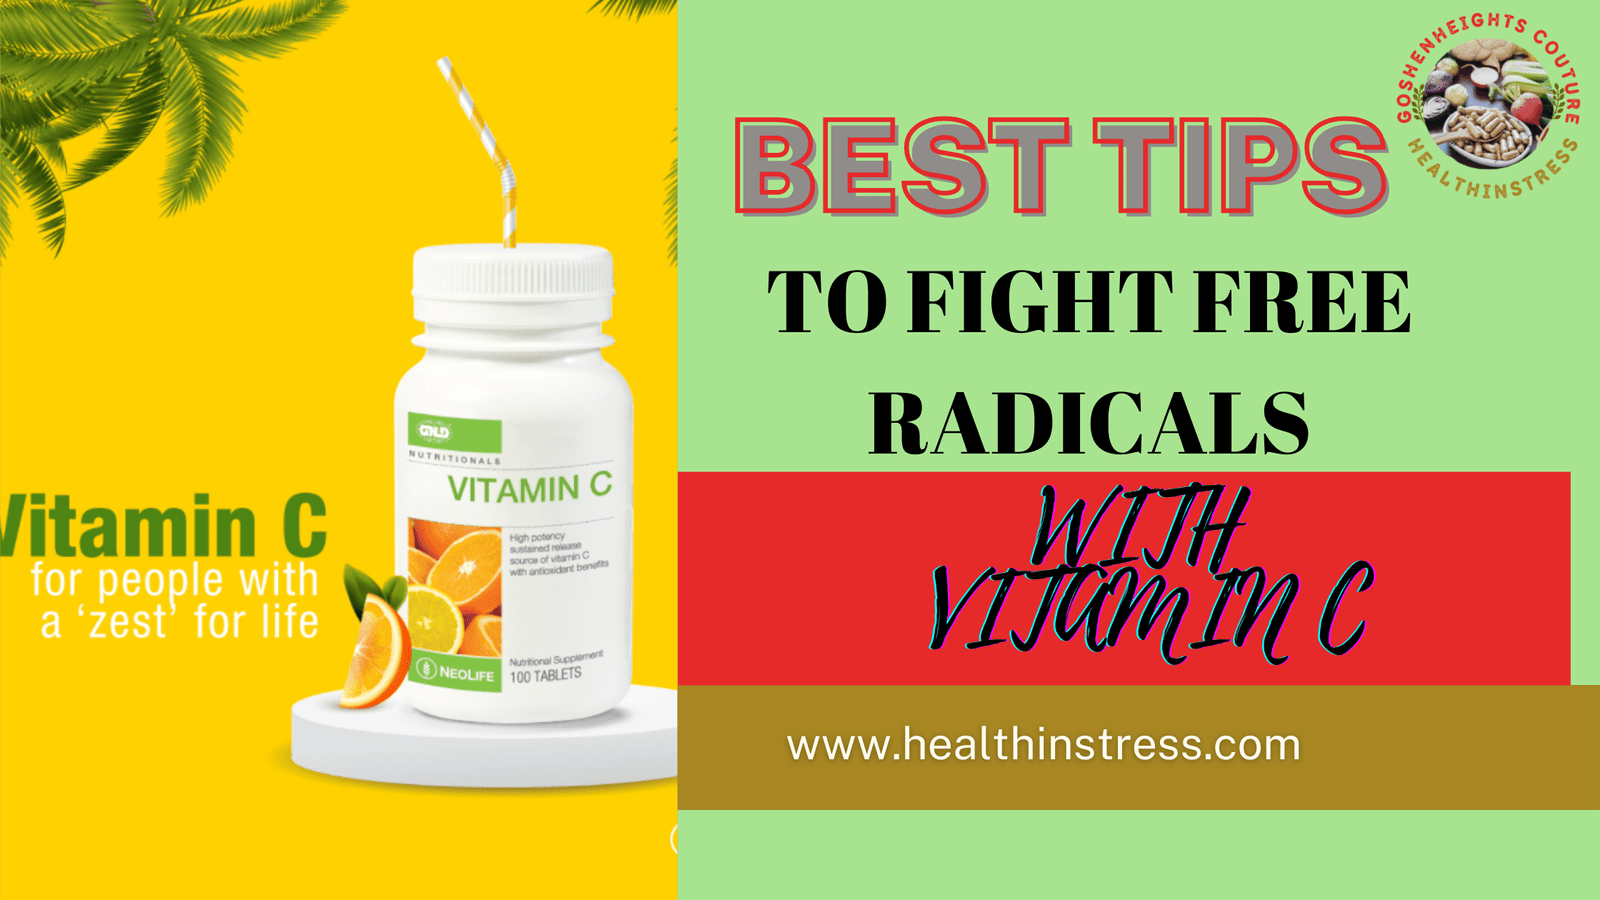 You are currently viewing BEST TIPS TO FIGHT FREE RADICALS WITH VITAMIN C